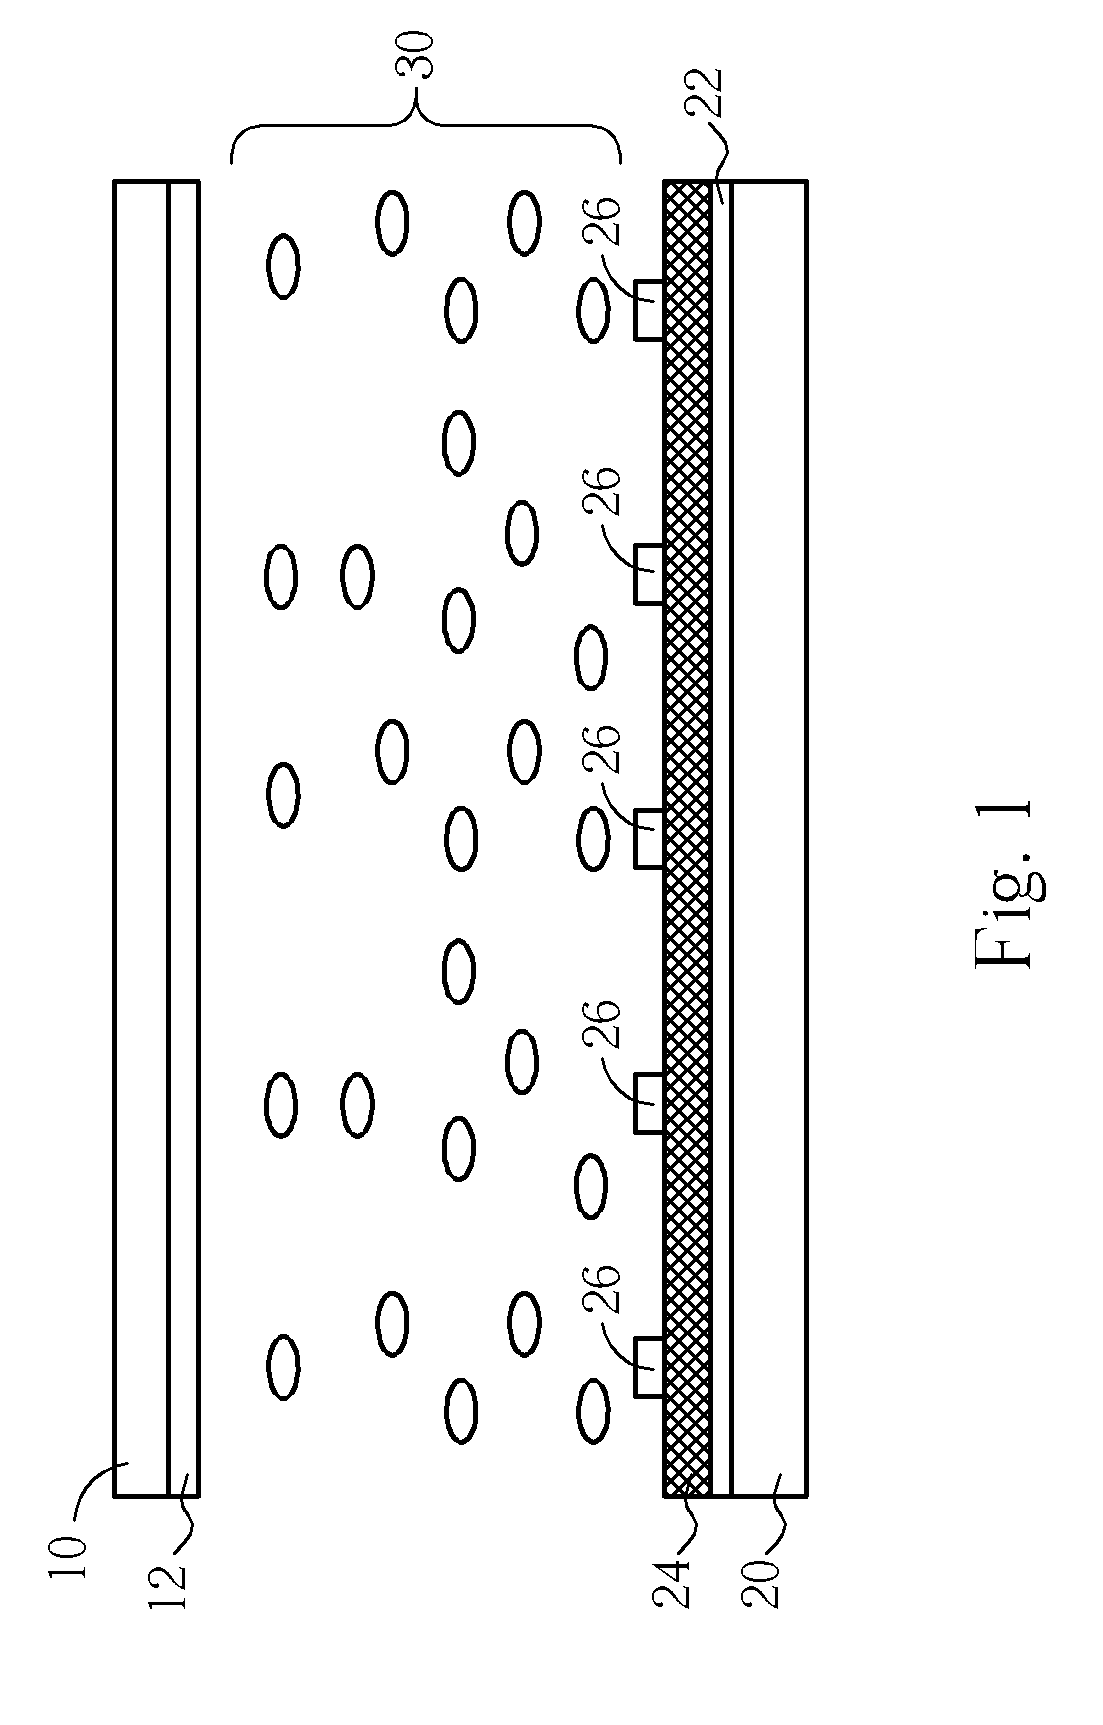 LCD device having adjustable viewing angles